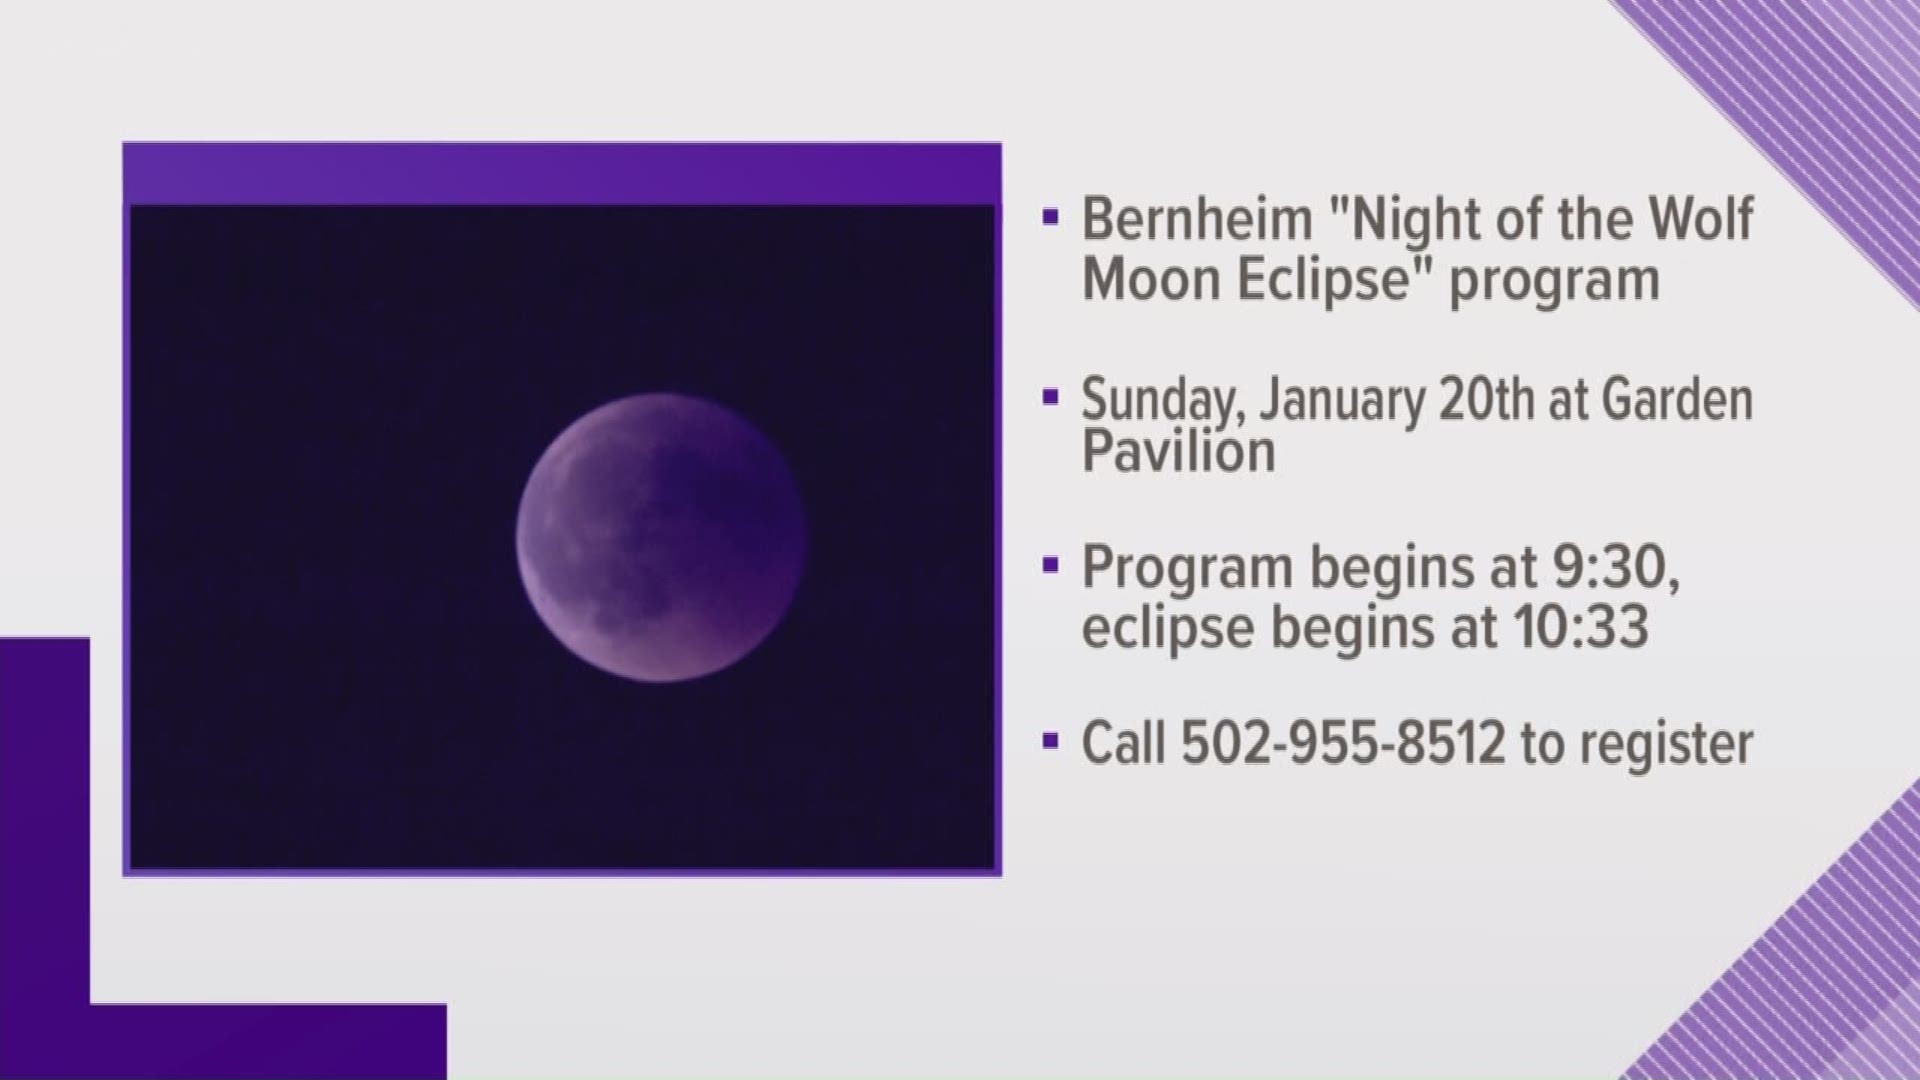 Bernheim is offering a front row seat to enjoy the Super Blood Wolf Moon.